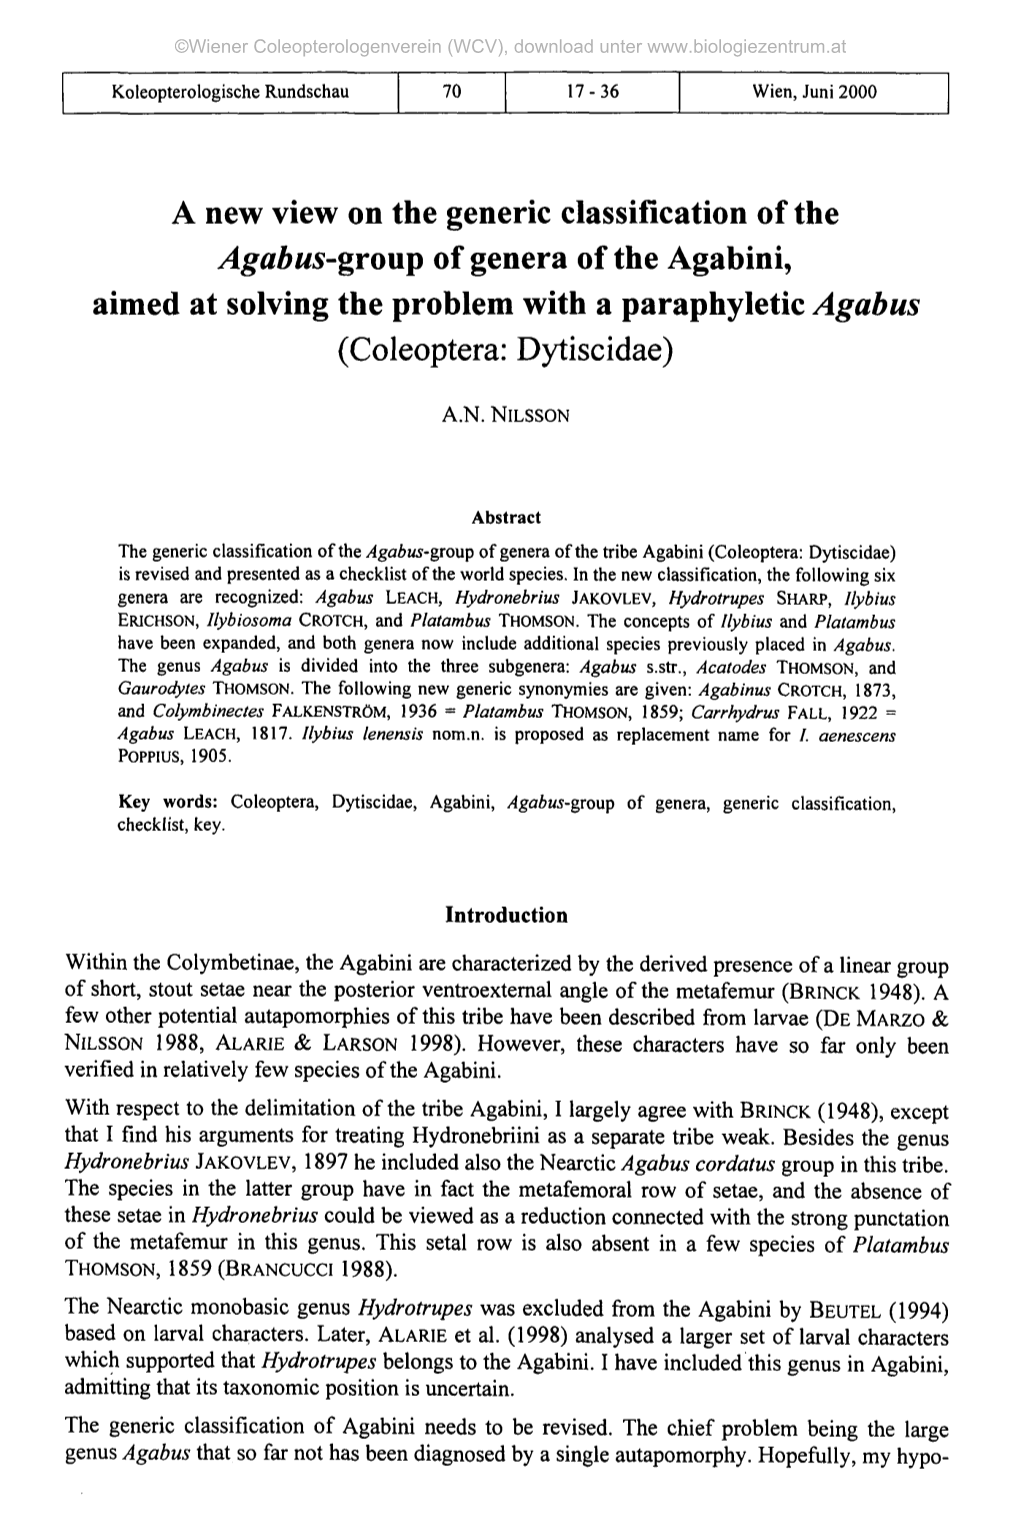 A New View on the Generic Classification of the Agabus-Group